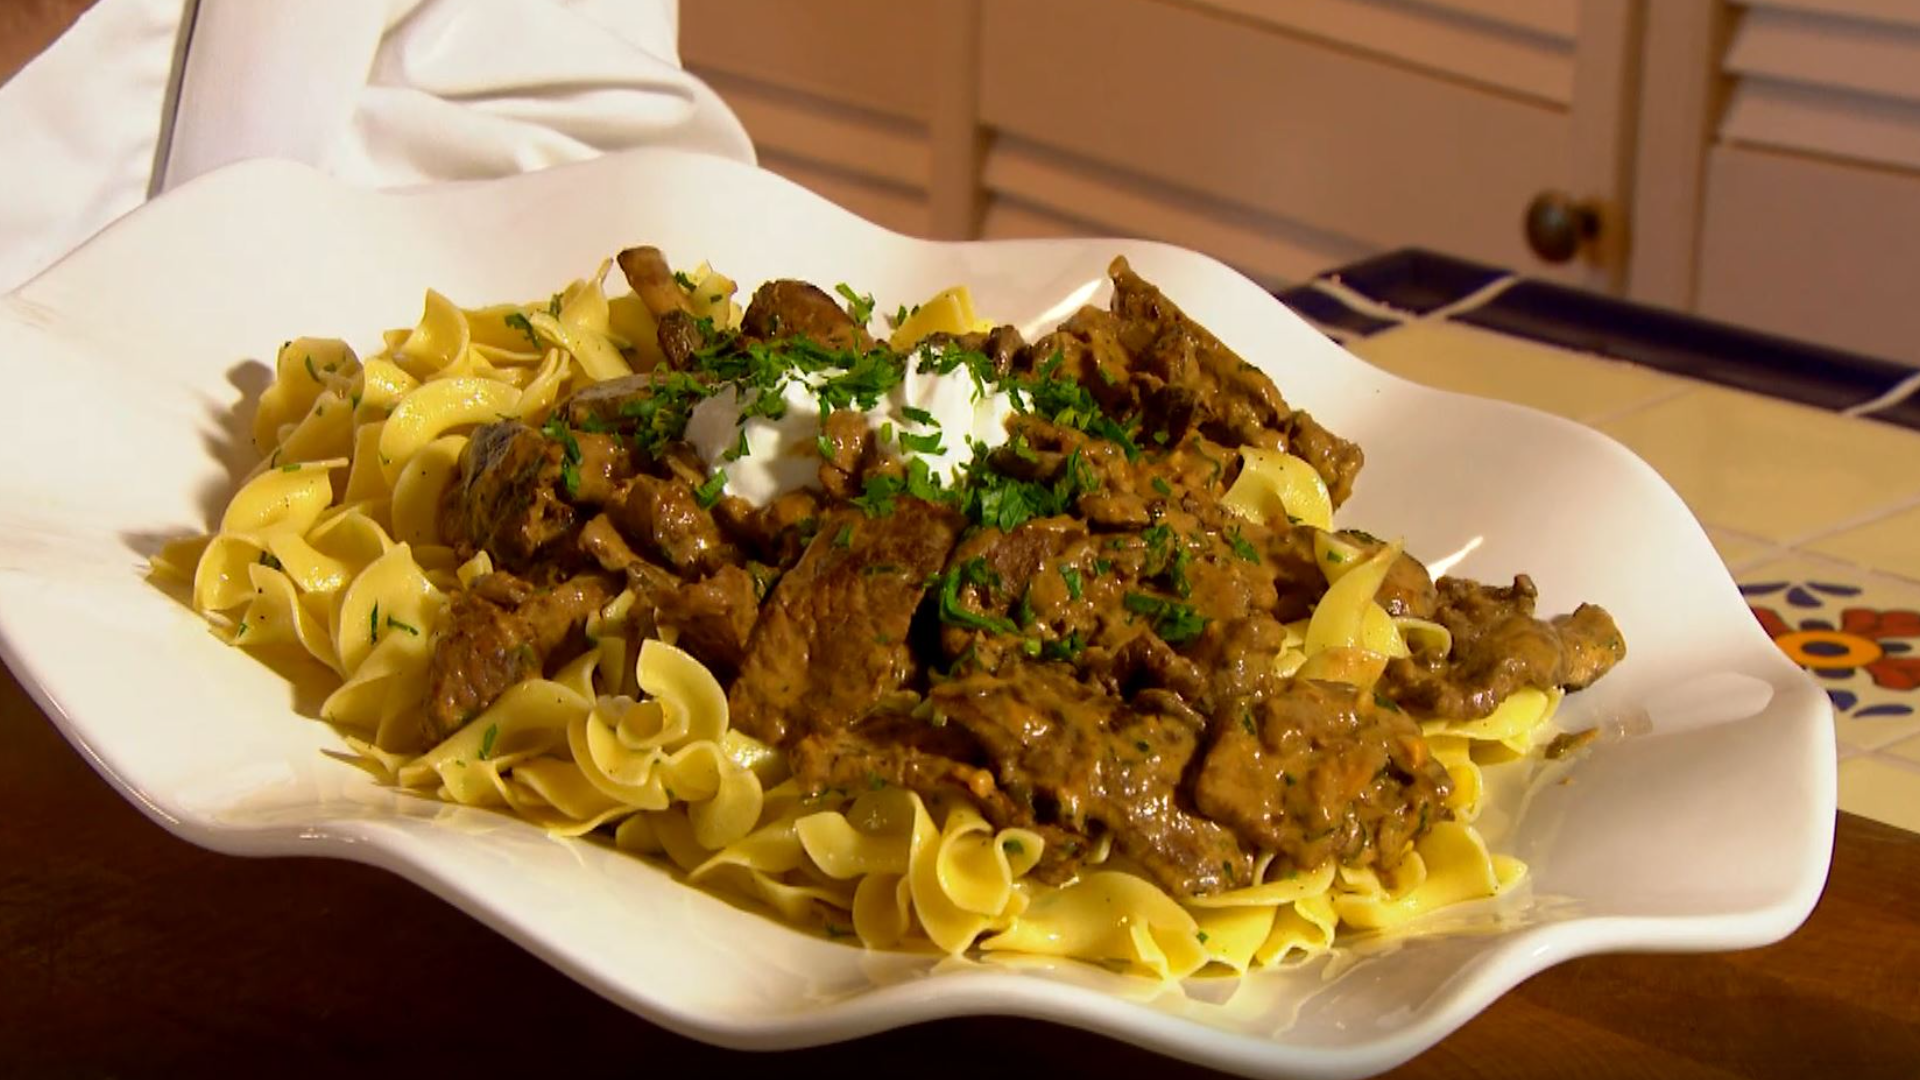 Beef stroganoff is a signature dish best served over noodles.